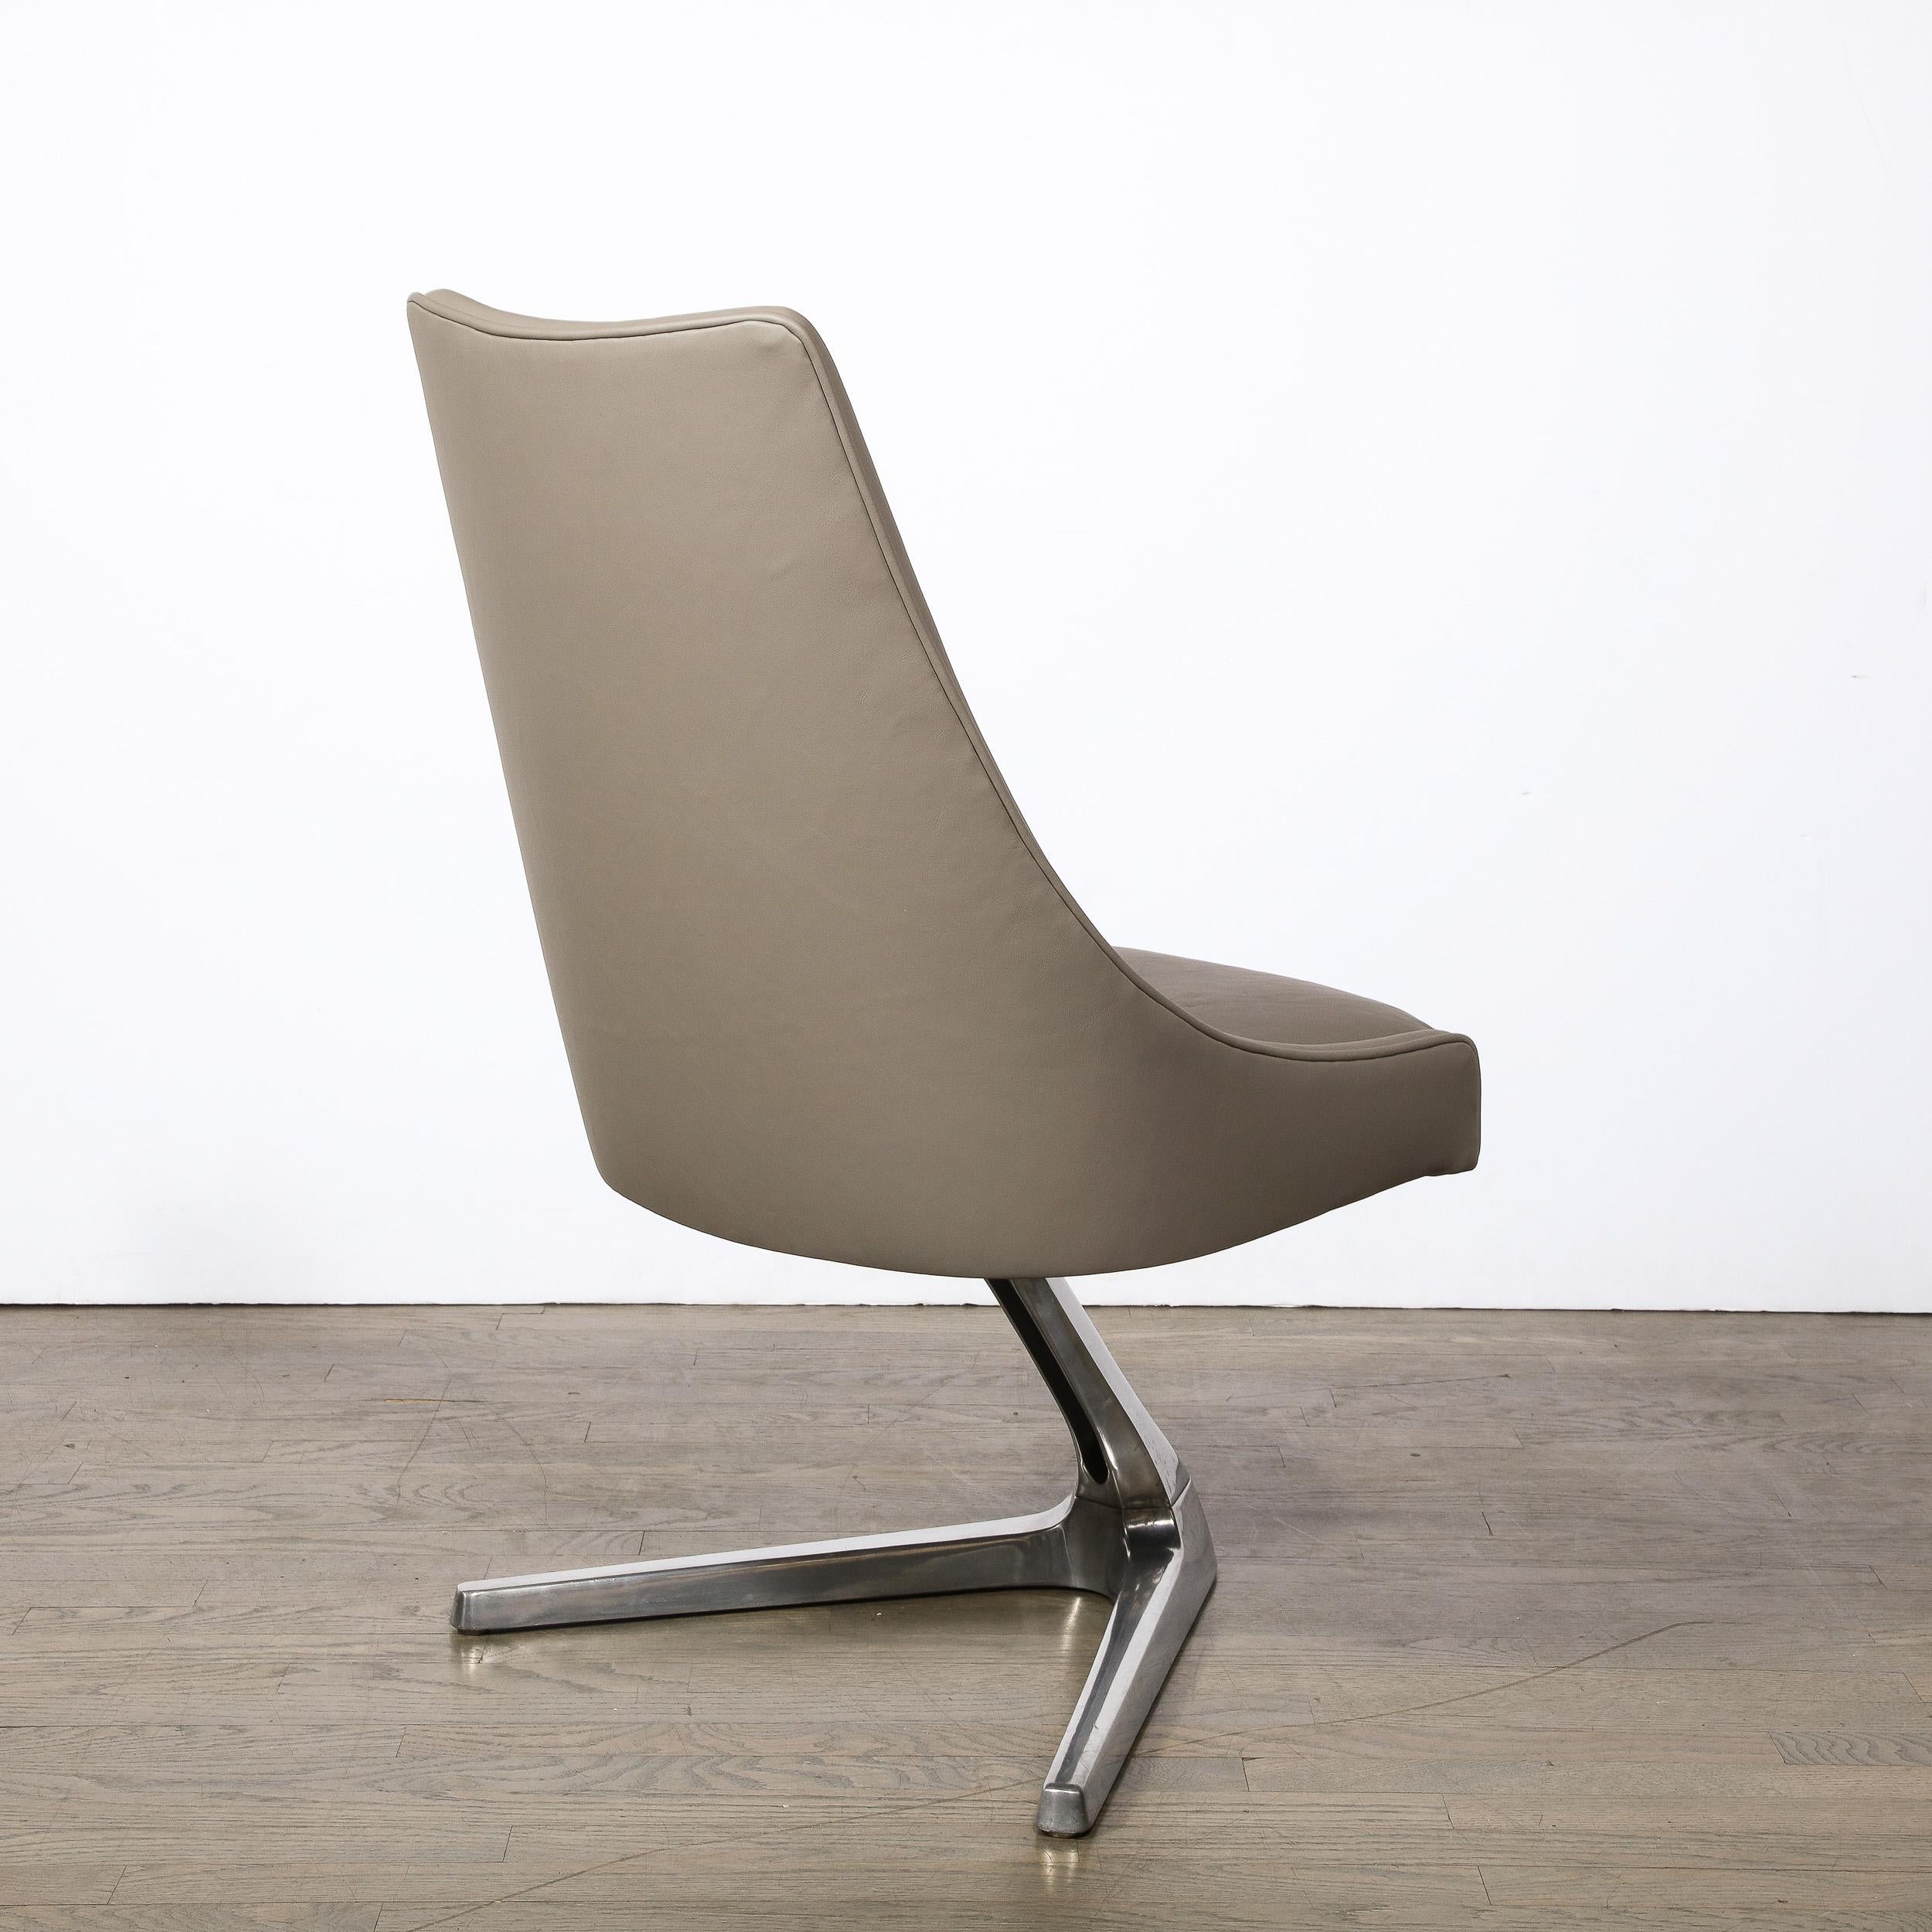 Mid-Century Modernist Chromecraft Sculpta Unicorn Swivel Chair In Excellent Condition For Sale In New York, NY